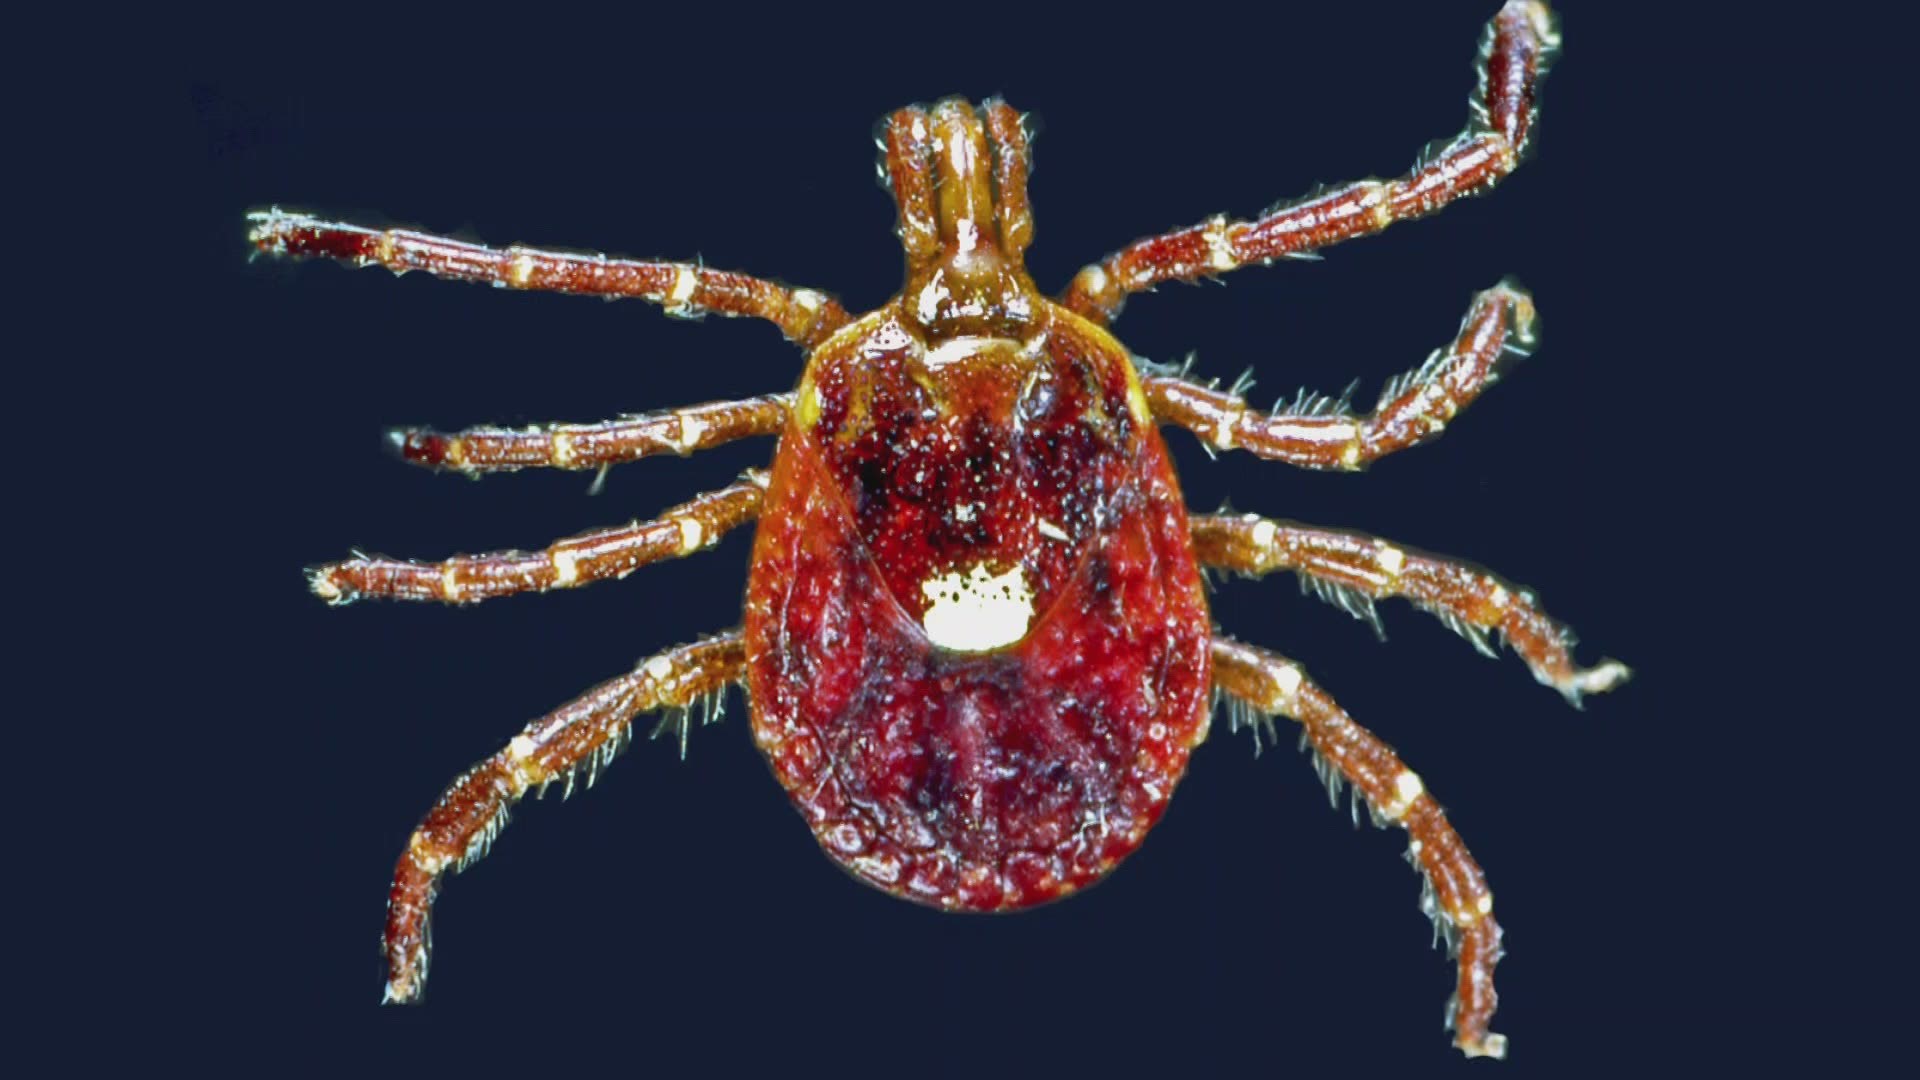 Experts say warming temperatures are allowing ticks to thrive in new areas of Maine.